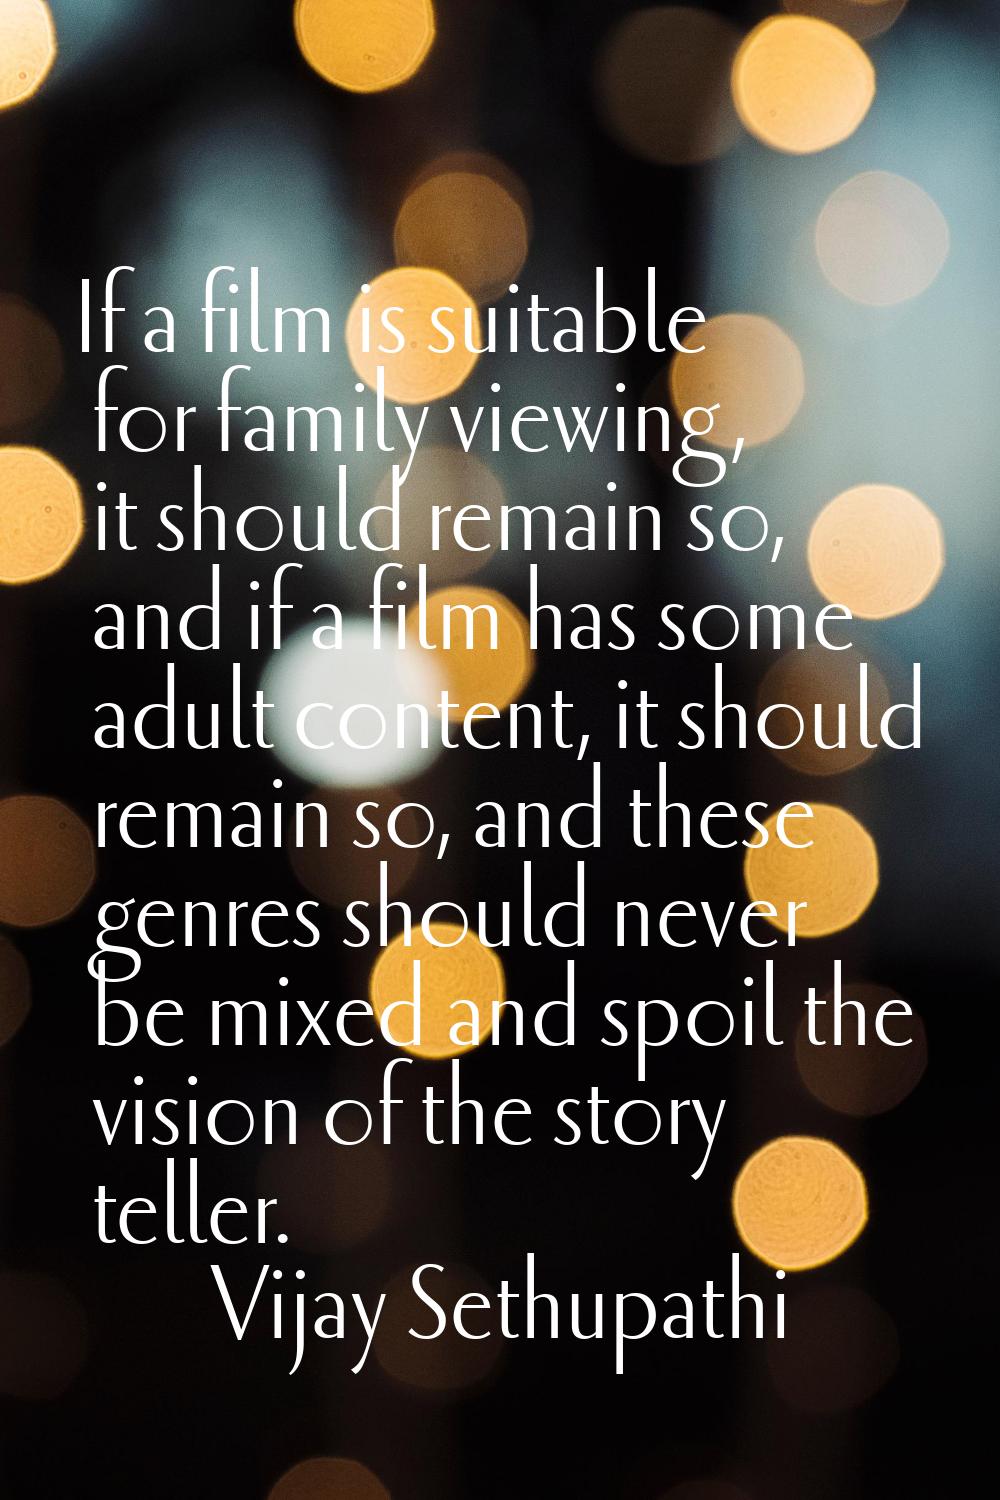 If a film is suitable for family viewing, it should remain so, and if a film has some adult content